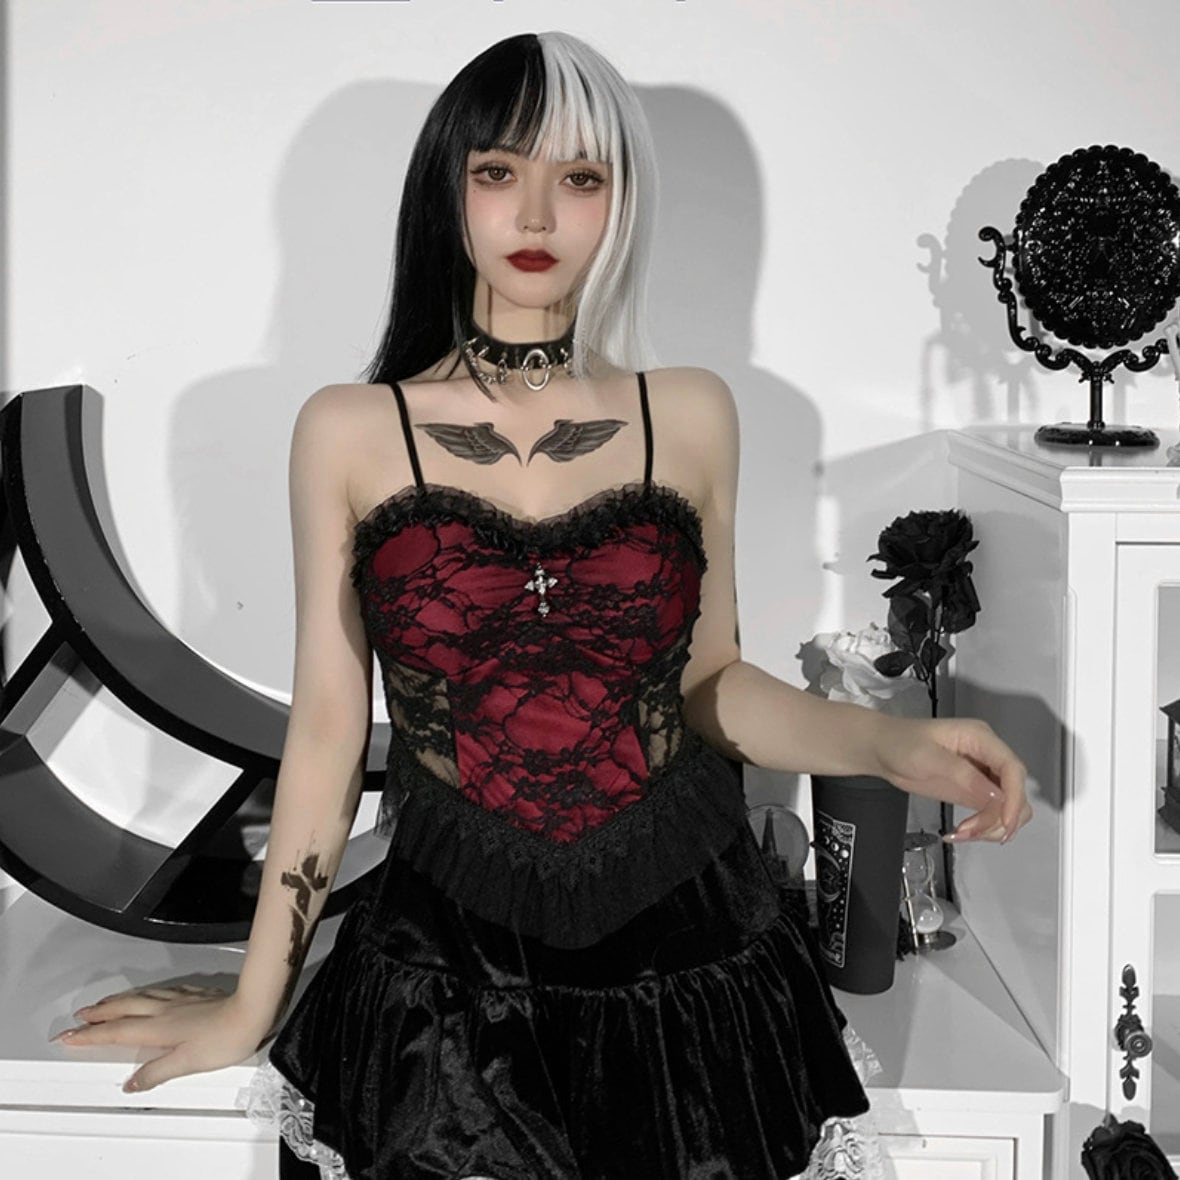 Gothic goth top vampire Velvet Black Lace Trim Emo Alternative Aesthetic Crop Tops Y2K Mall Goth Crop Tops Backless Sexy Strap Tanks gothic # 281